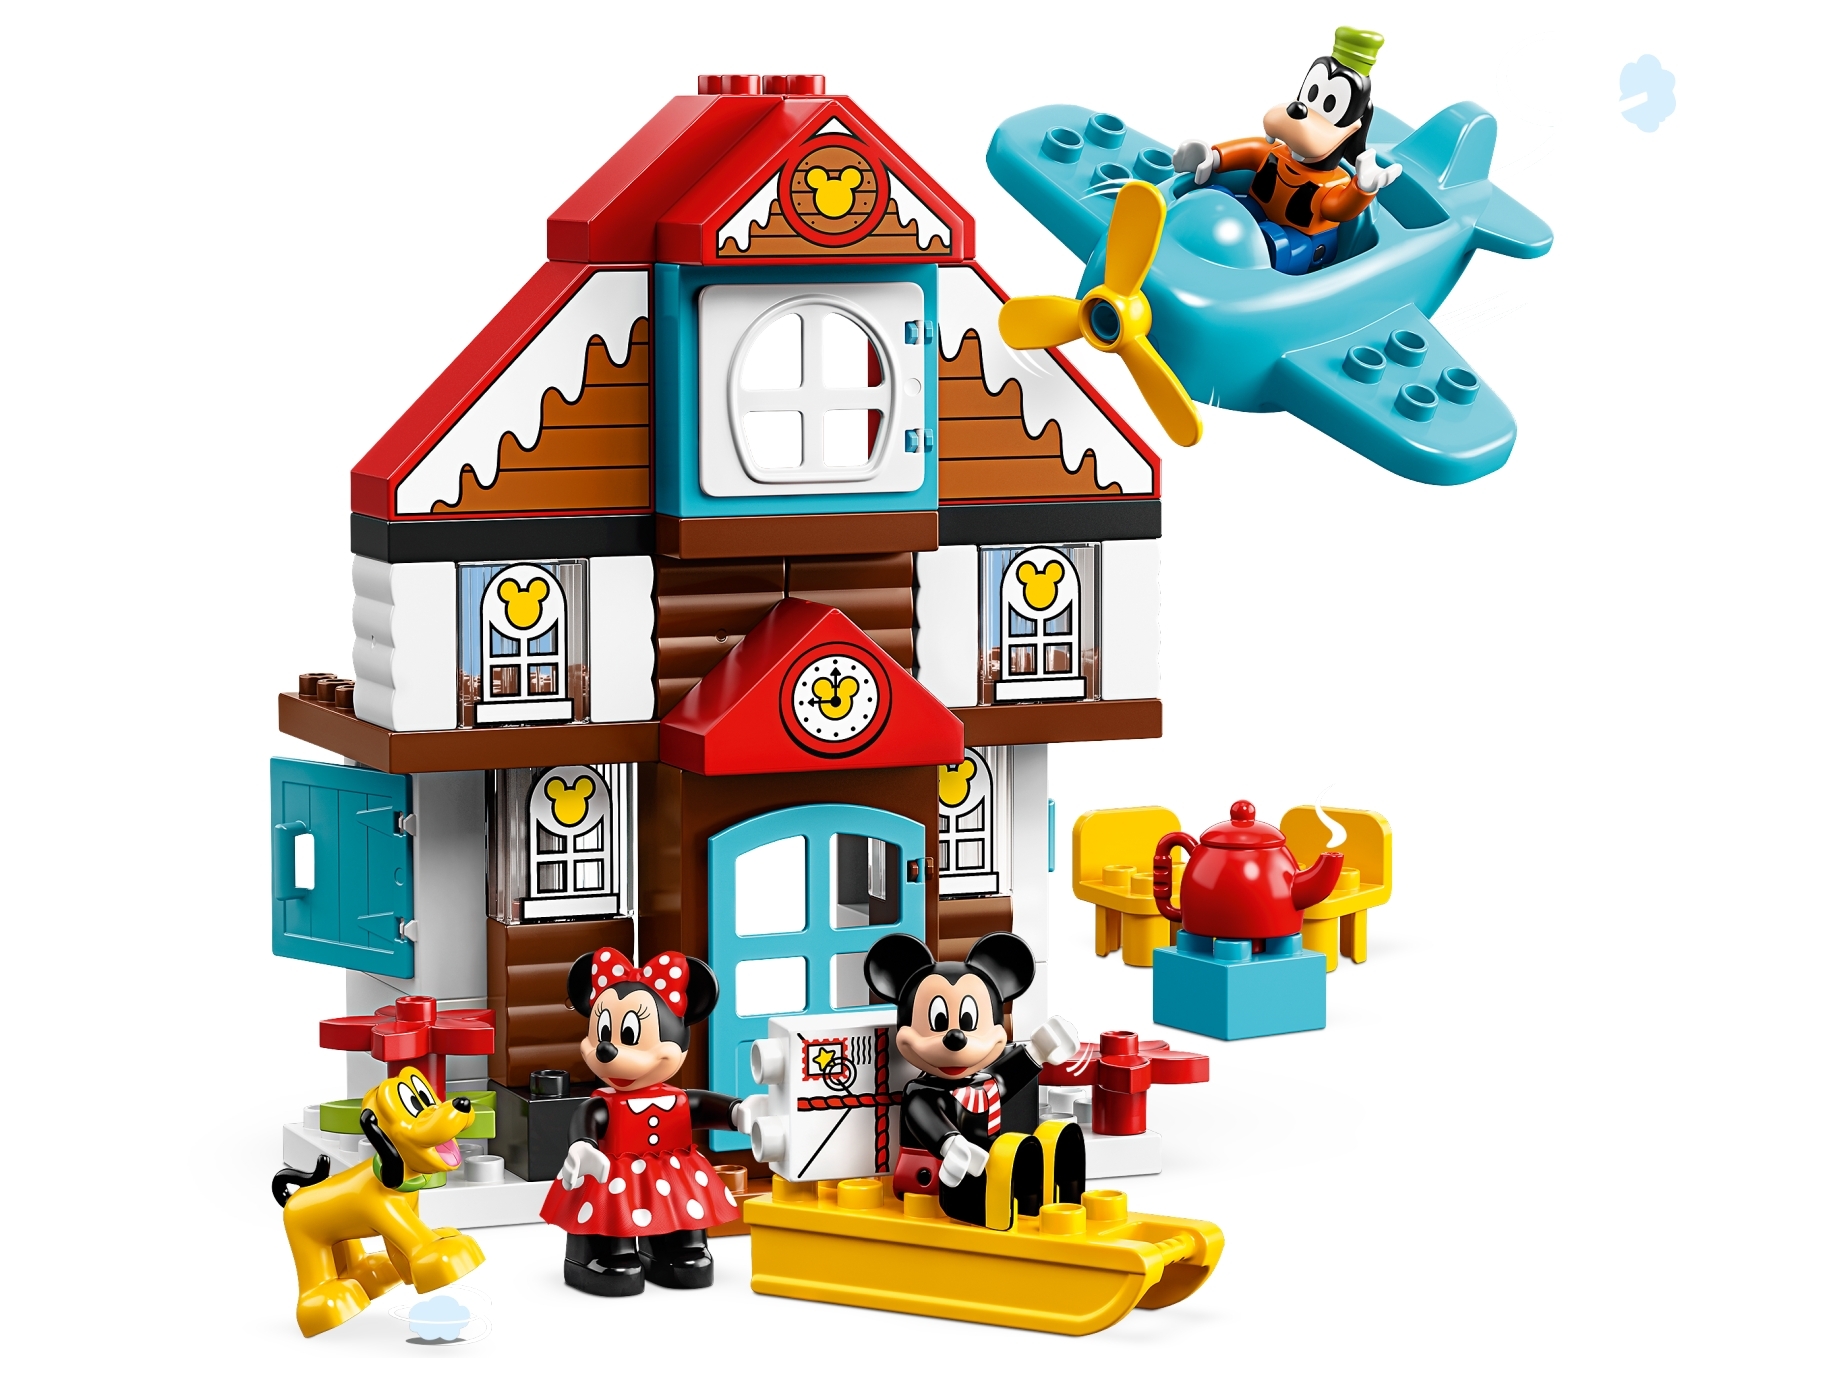 Mickey's Vacation 10889 | Disney™ | at the Official LEGO® Shop US